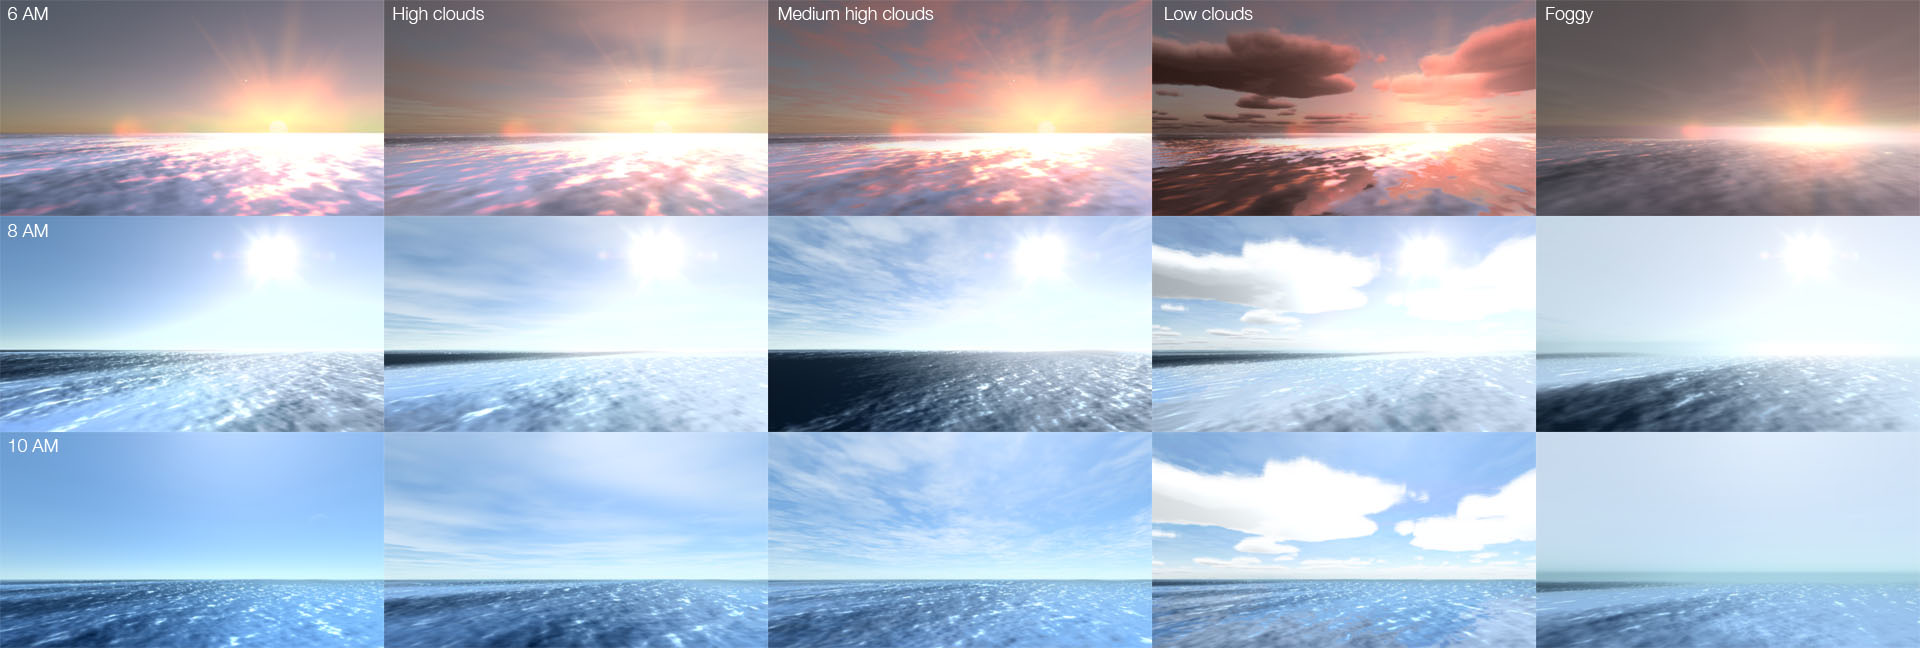 New sky shader. The shader for the day and night sky has been completely rewritten. It has become more realistic and depending on the time of day, pos...